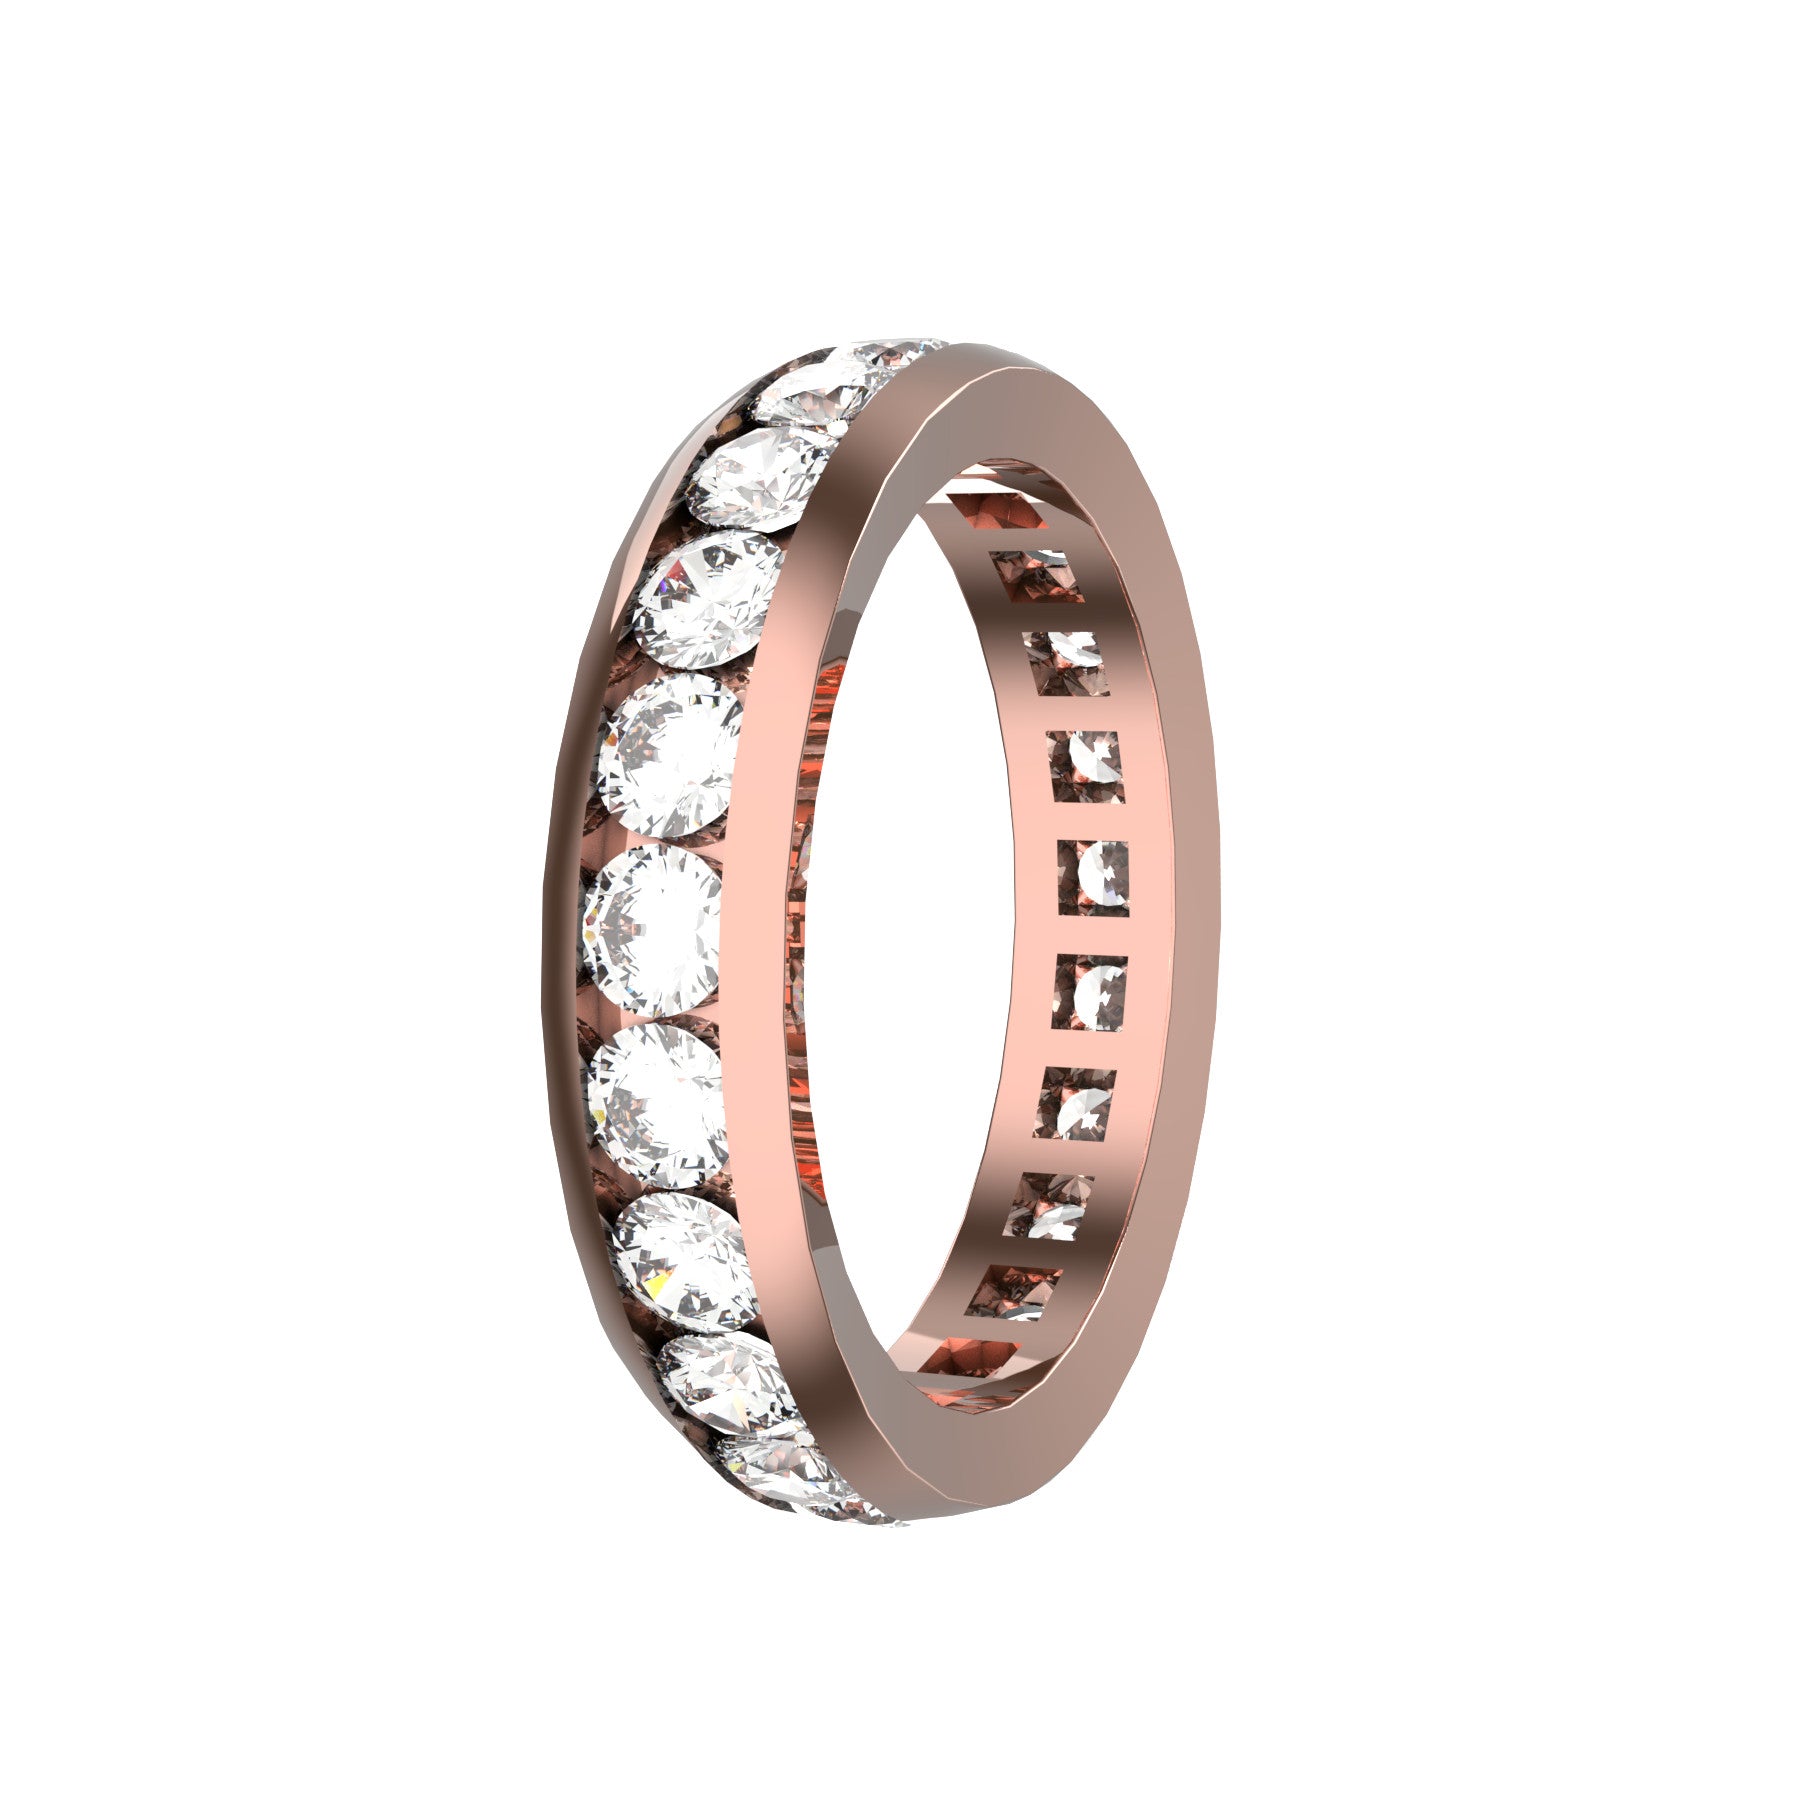  everlasting wedding band, 18 k pink gold, 0,07 ct round natural diamonds, weight about 3,90 g. (0,14 oz), width 4,20 mm